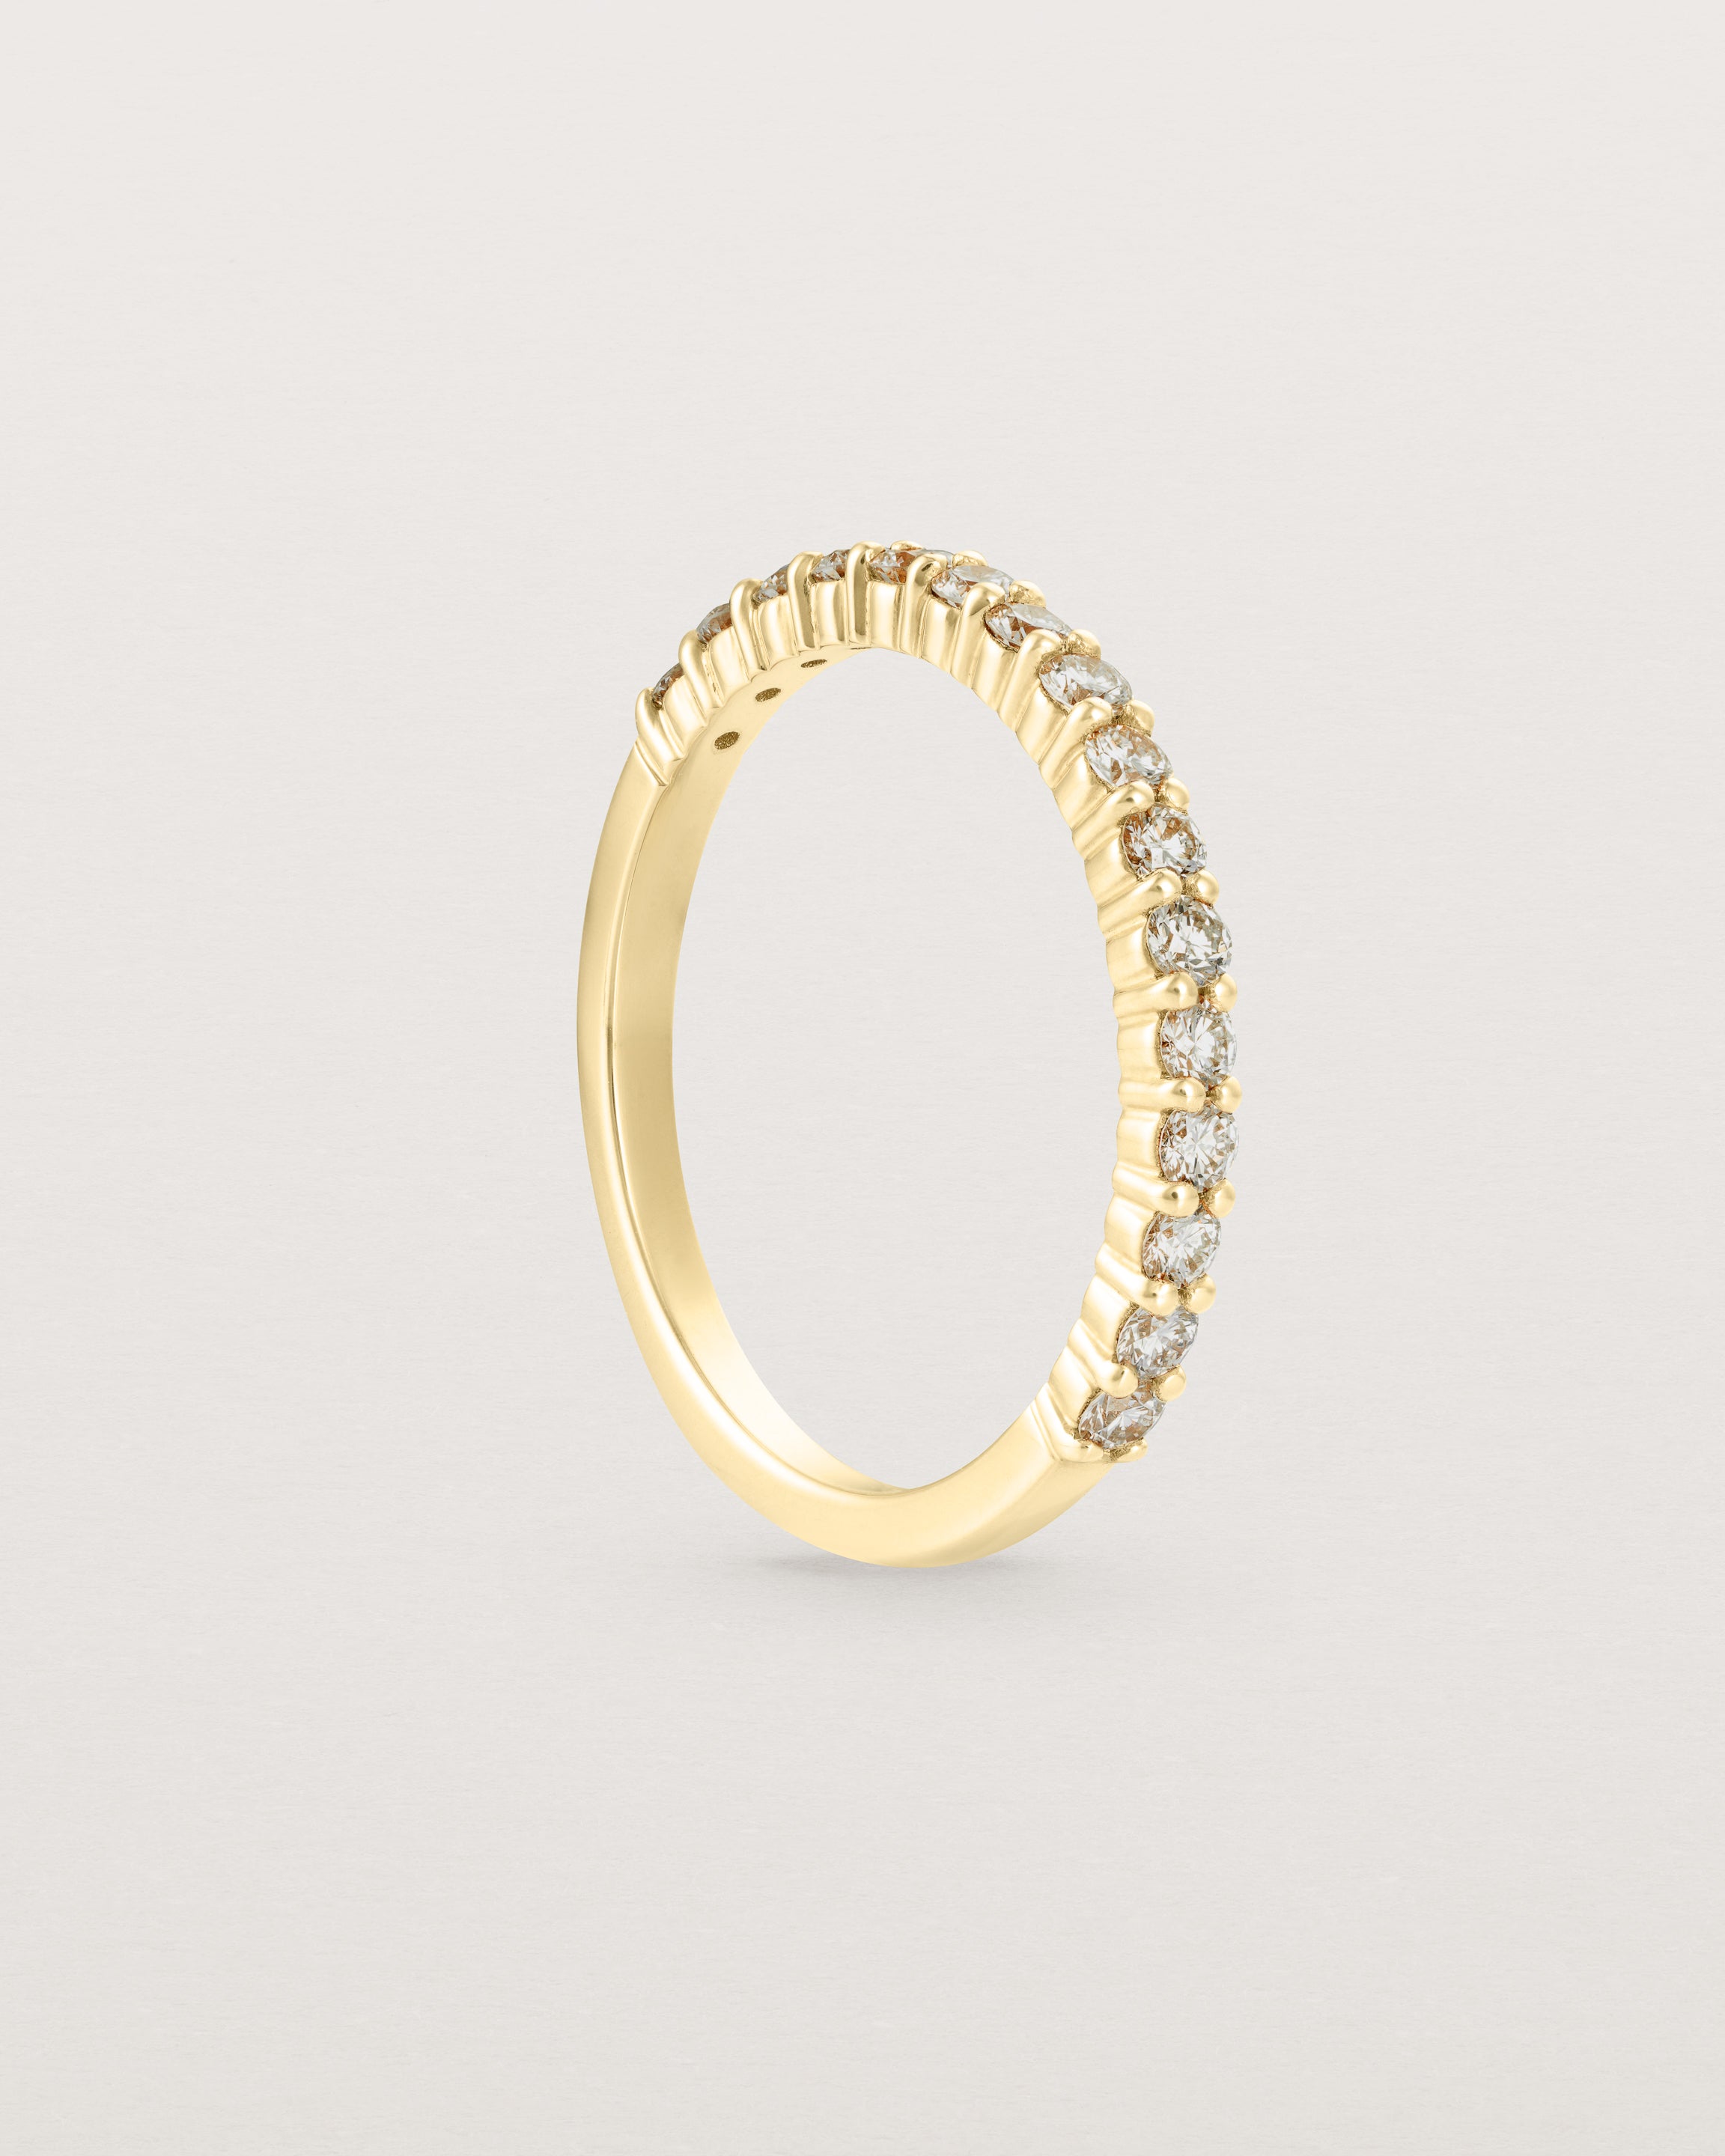 Standing view of the Demi Grace Ring | Champagne Diamonds in yellow gold.